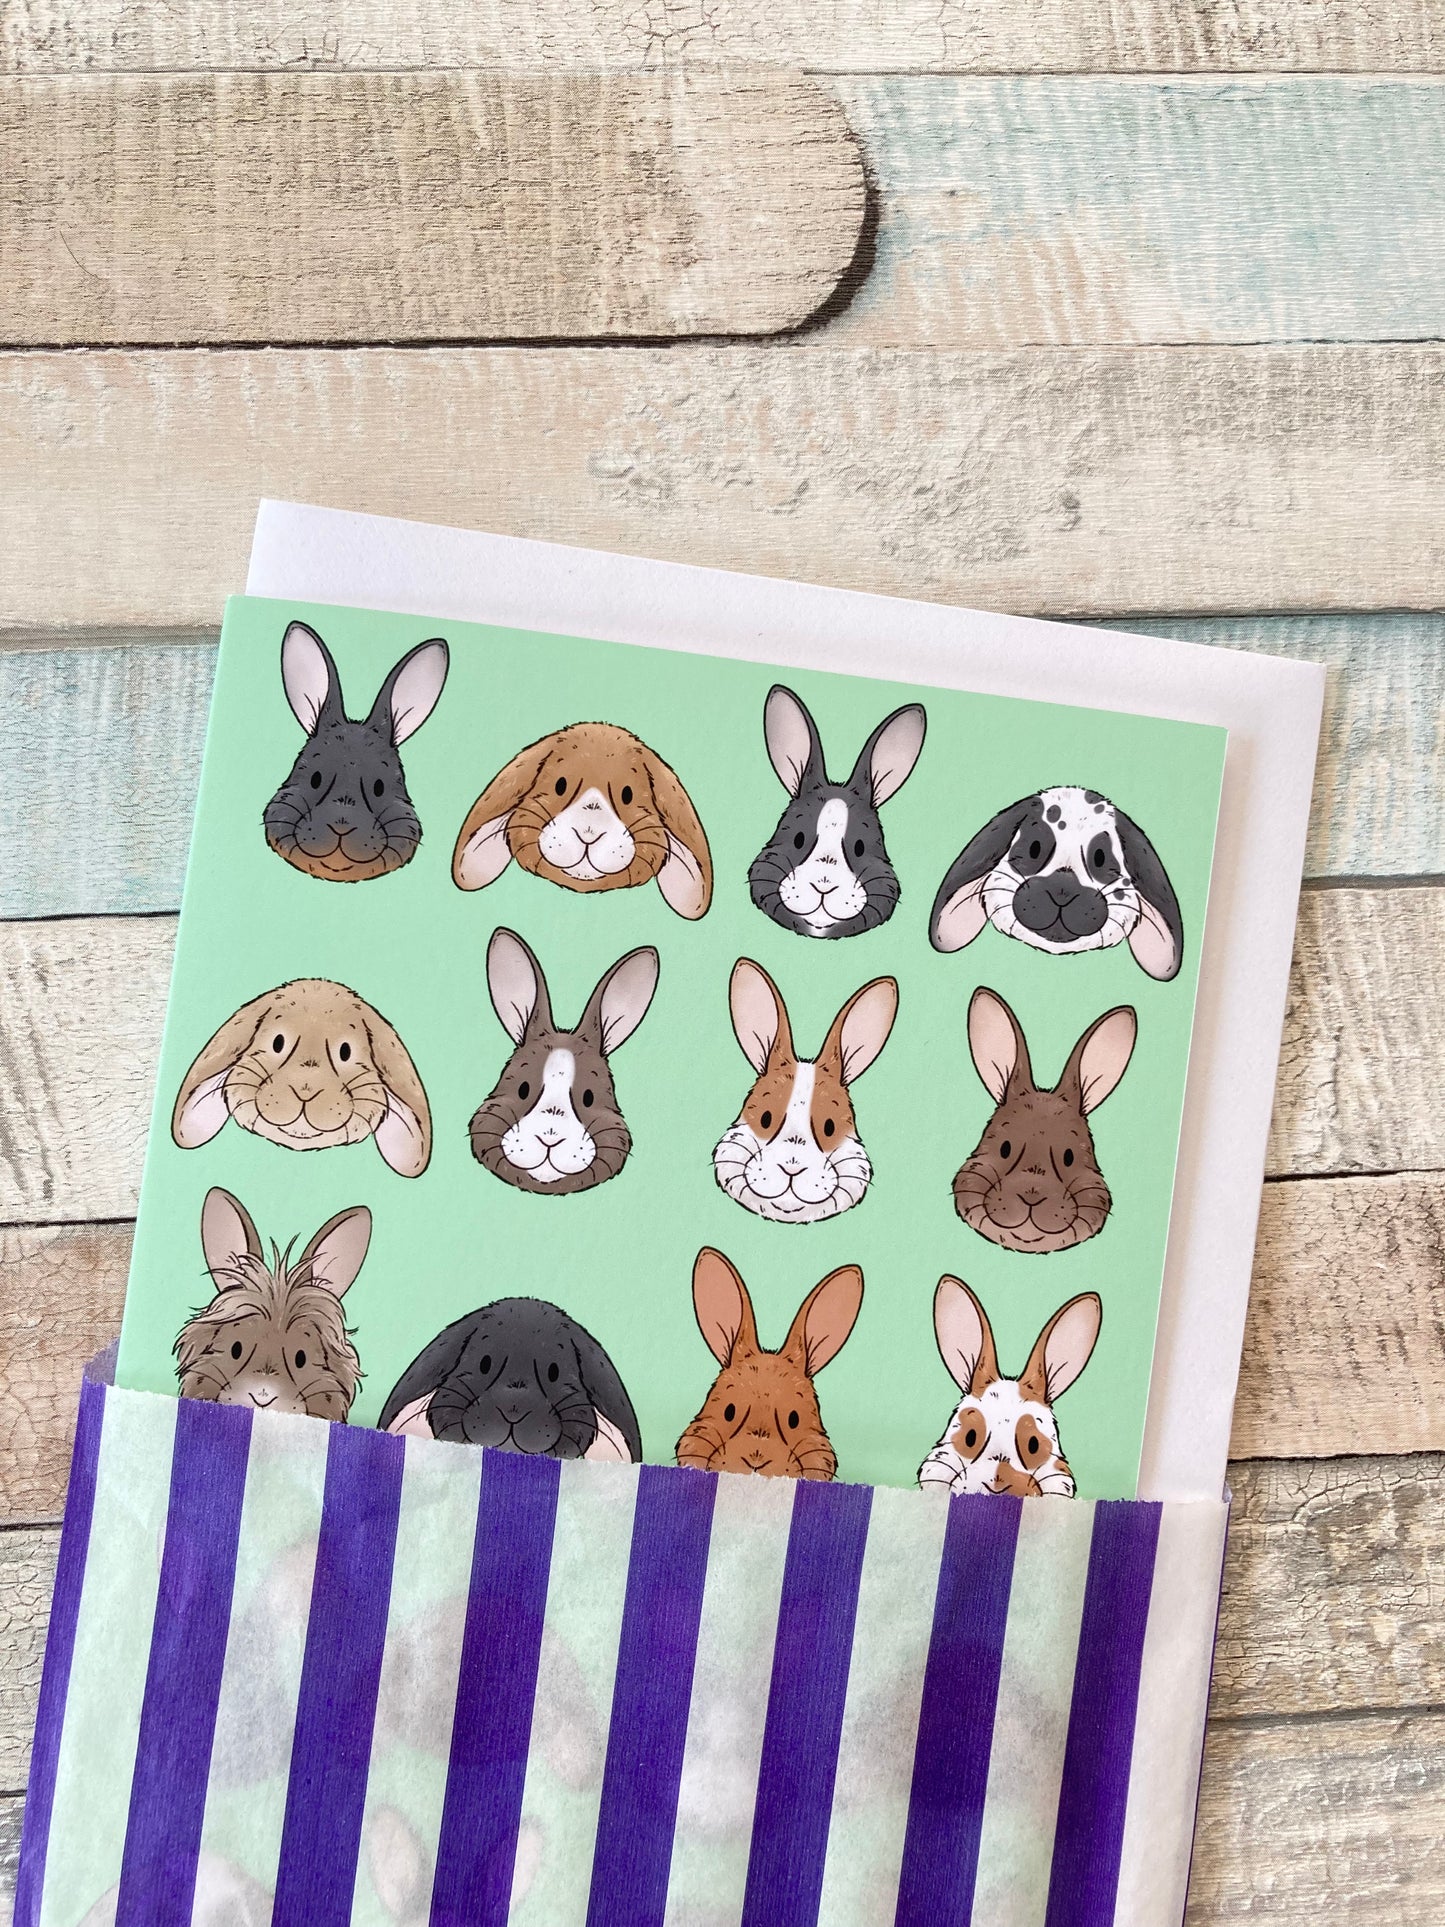 Bunny Faces A6 Blank Greeting Card with White Envelope, Any Occasion Animal Lover Card, Rabbit lover Birthday, Just For You Card